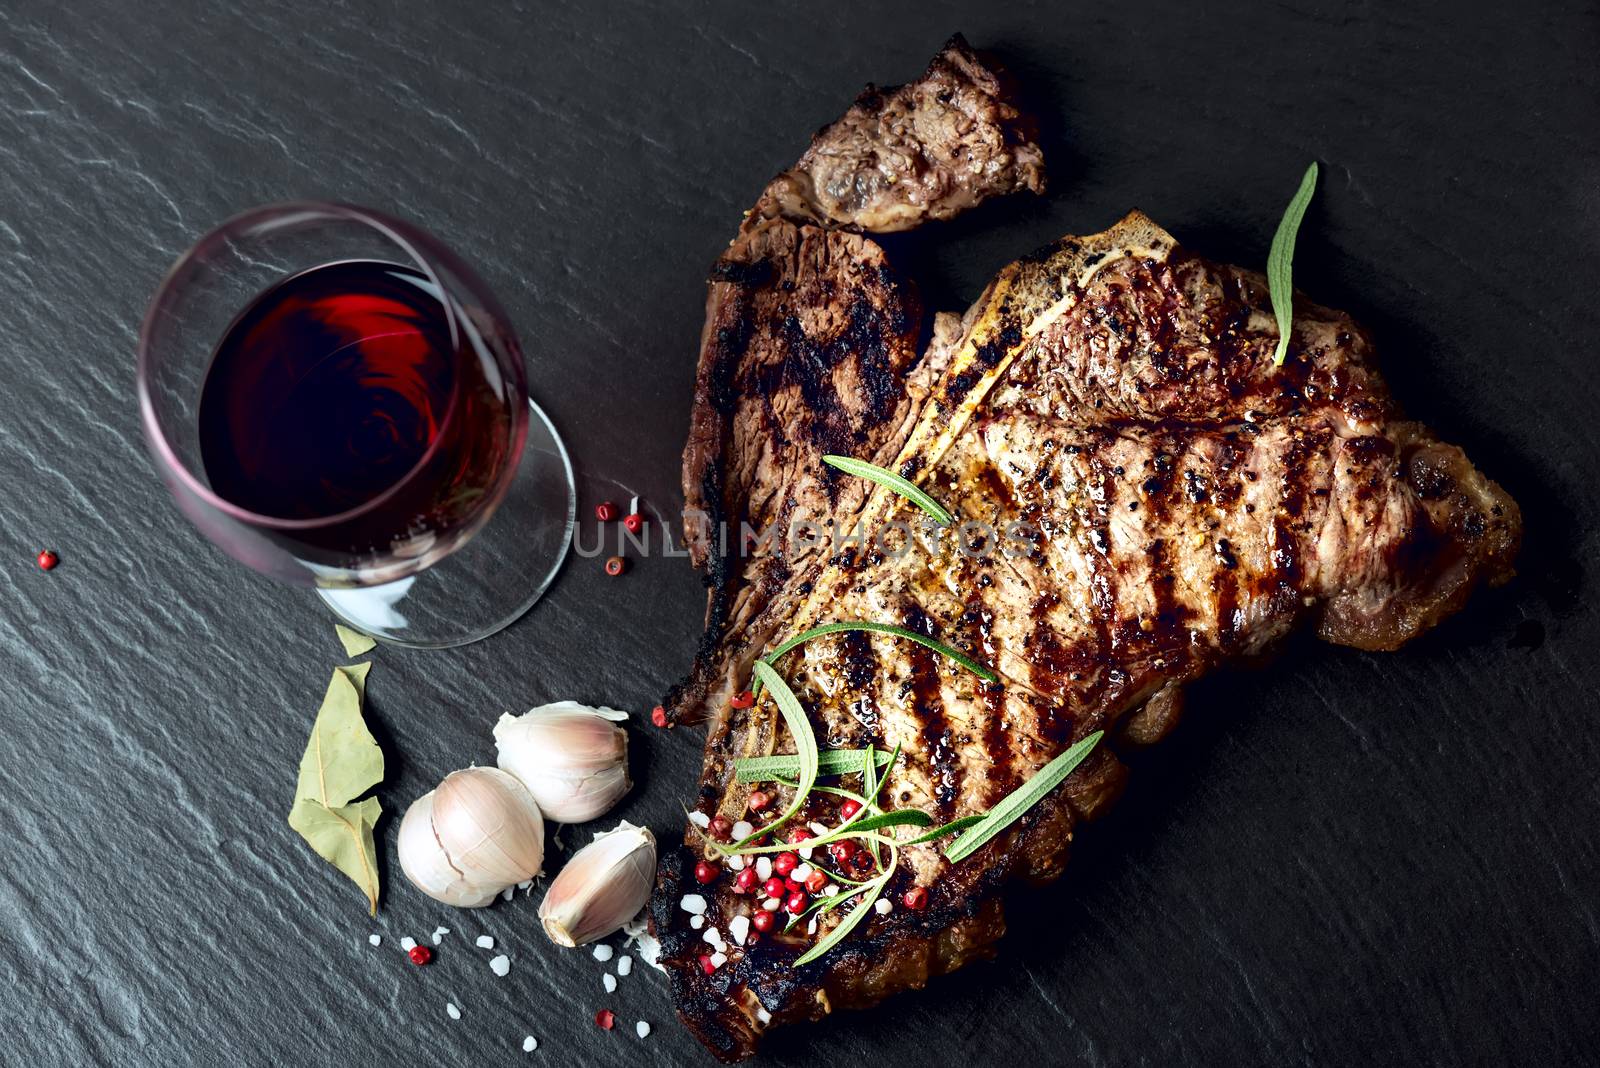 Steak with spices and glass of red wine on stone